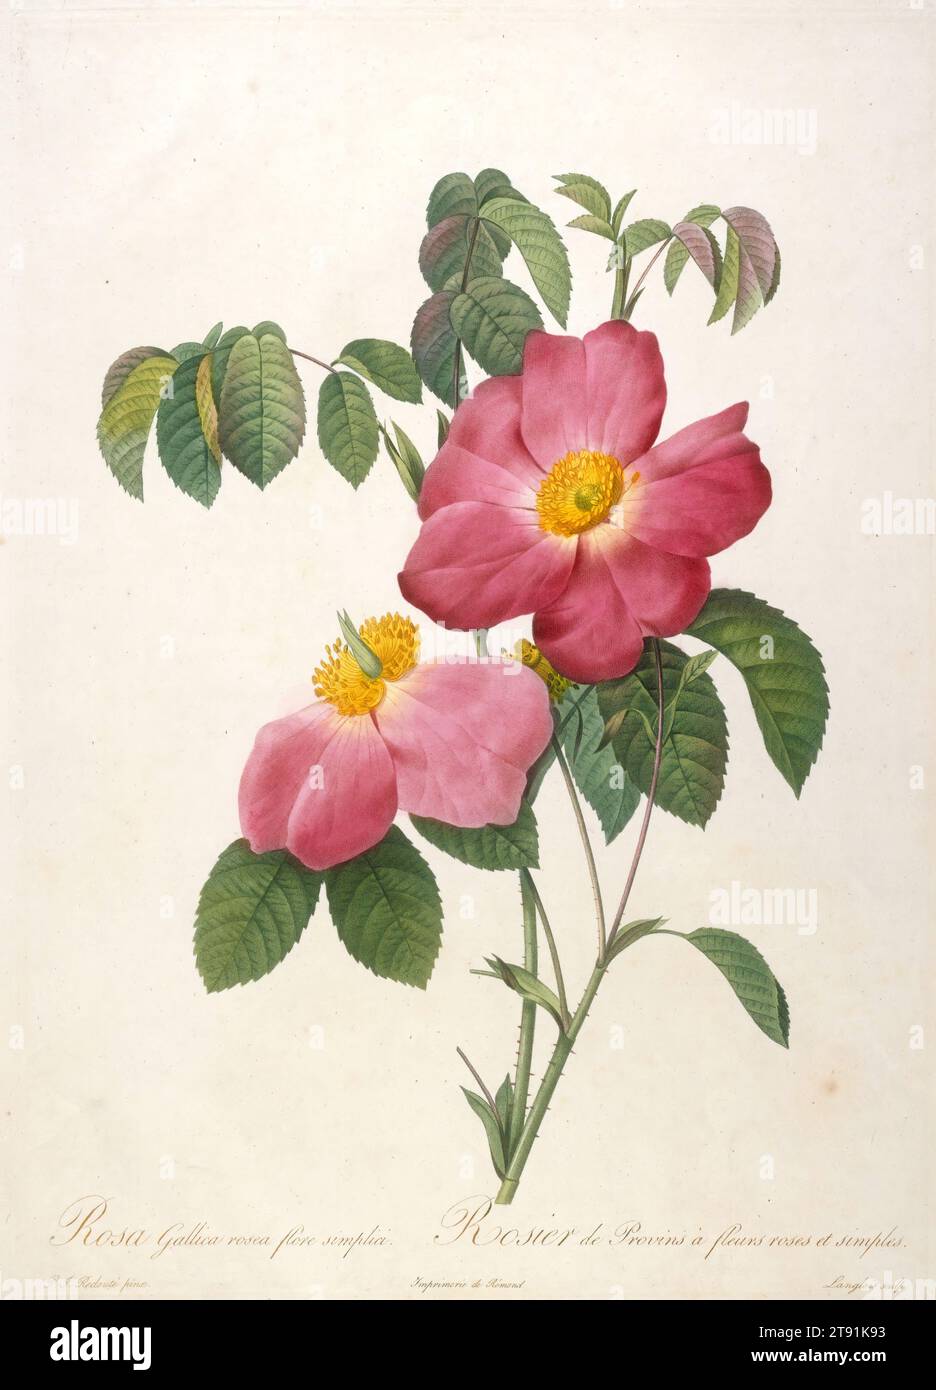 Rosier de Provinsi a fleurs roses et simples, from La Couronne Des Roses, 1817-1824, After Pierre-Joseph Redouté; Engraver: François Langlois (called Ciartres), French, Flemish (active France), 1759–1840, 14 x 18 1/8 in. (35.56 x 46.04 cm) (plate), Stipple engraving, color-printed, finished by hand, France, 19th century Stock Photo